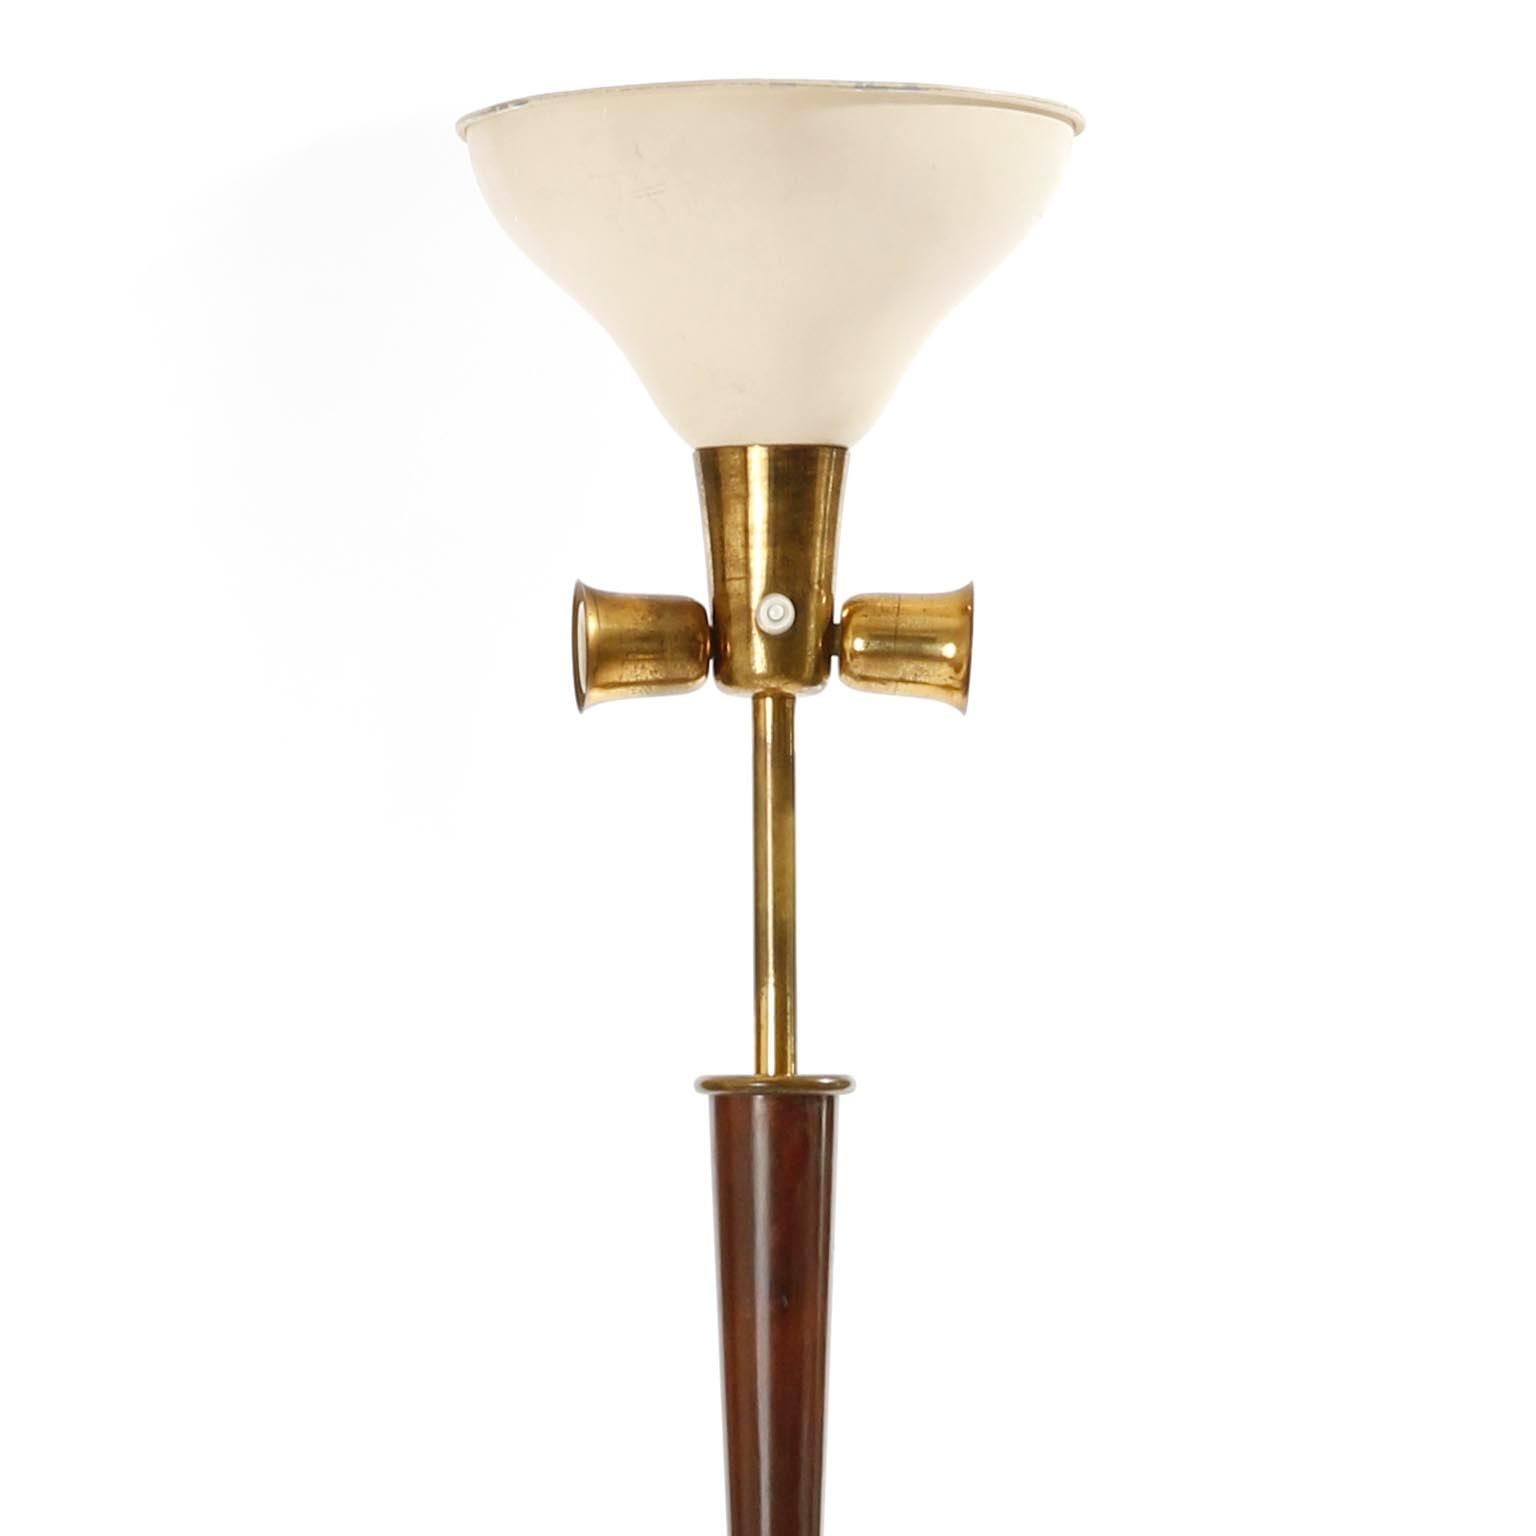 Floor Lamp by Stilnovo, Stained Walnut Brass Marble Base, circa 1946-48 For Sale 2